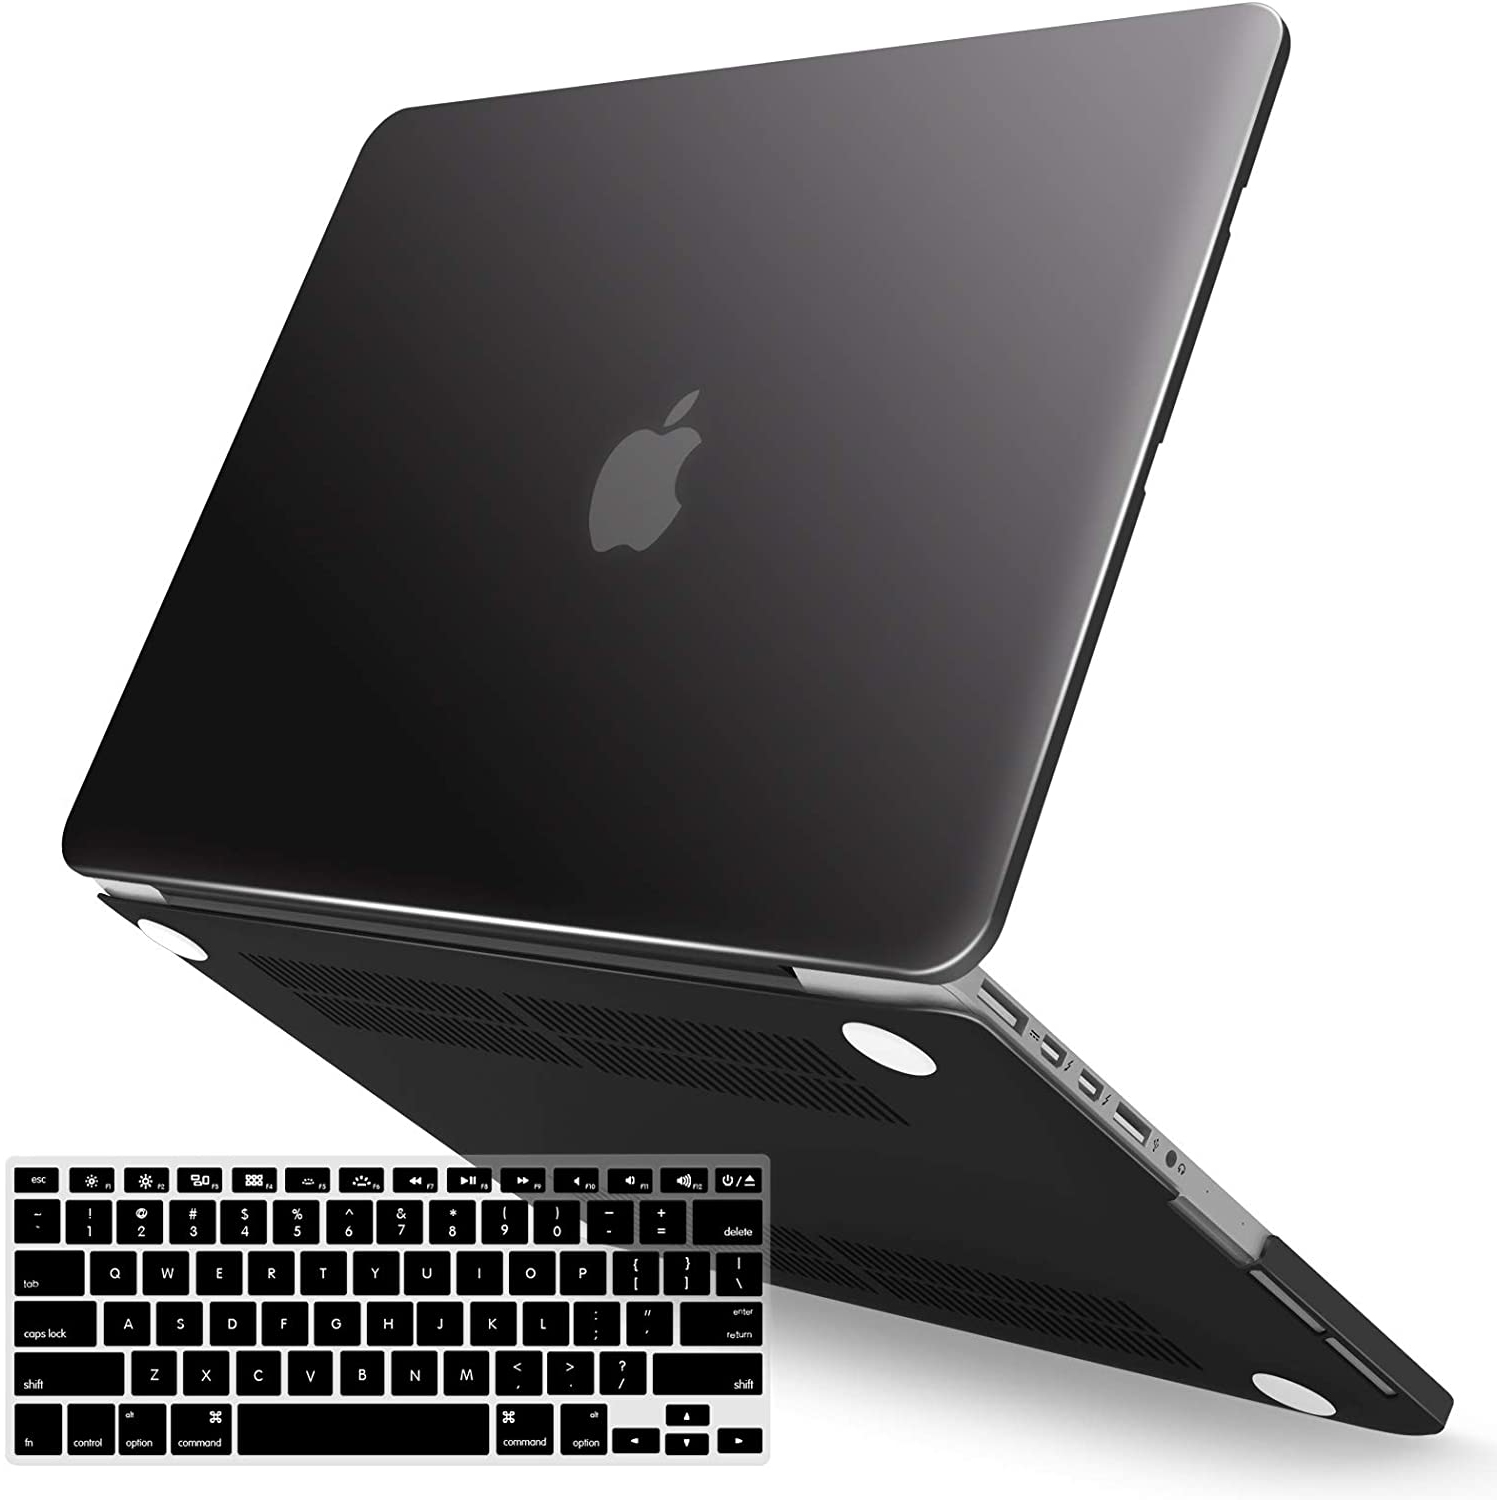 MacBook Pro 13 Inch case A1278 Release 2012-2008, Plastic Hard Shell Case with Keyboard Cover for Apple Old